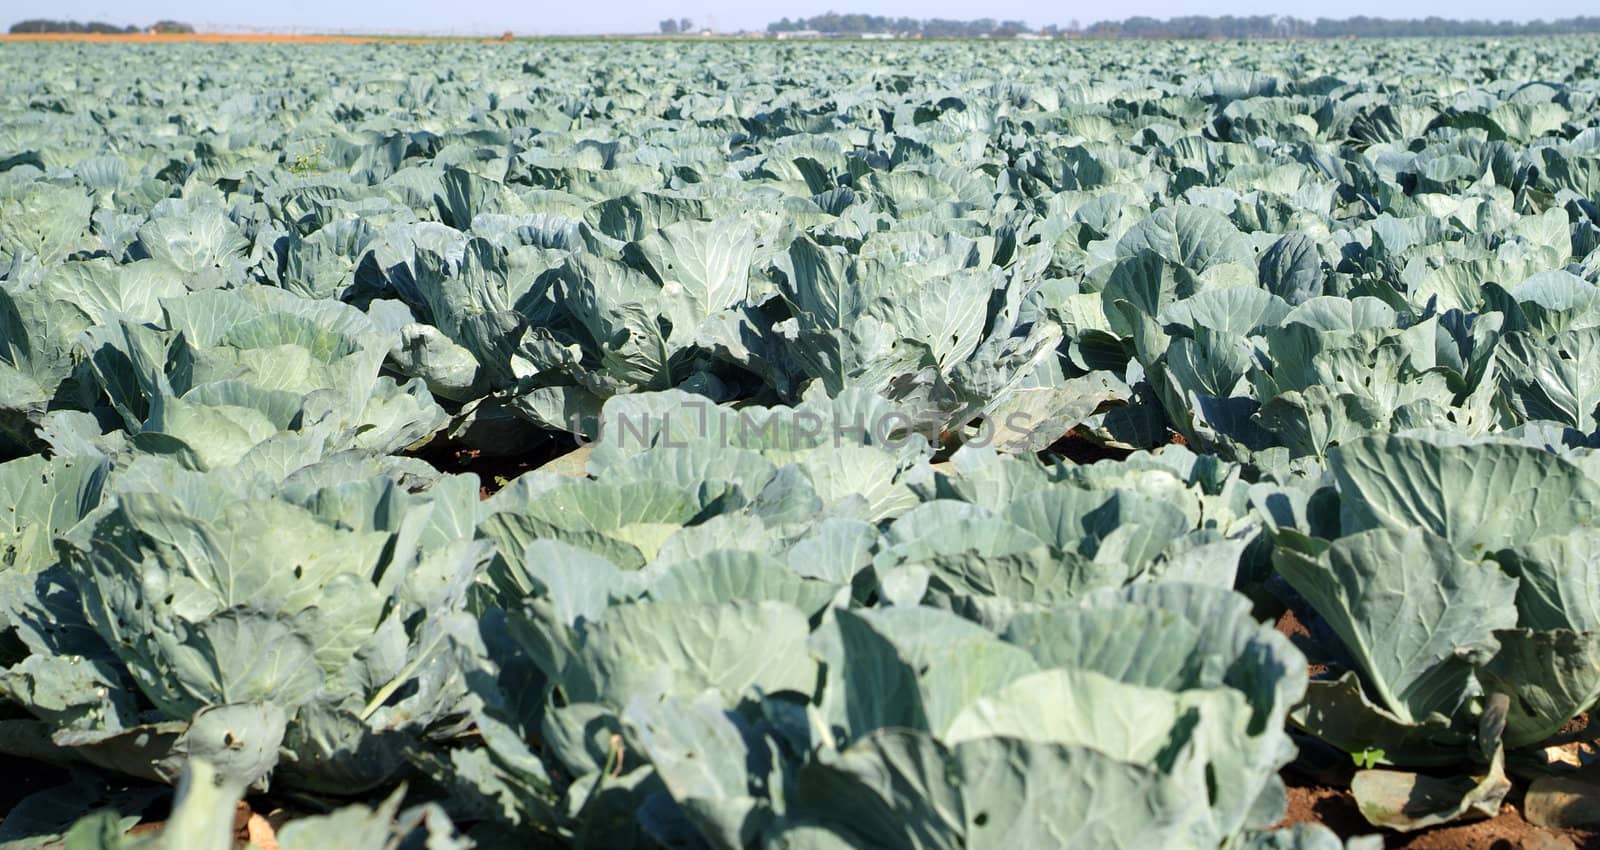 Cabbages growing in rural farm field